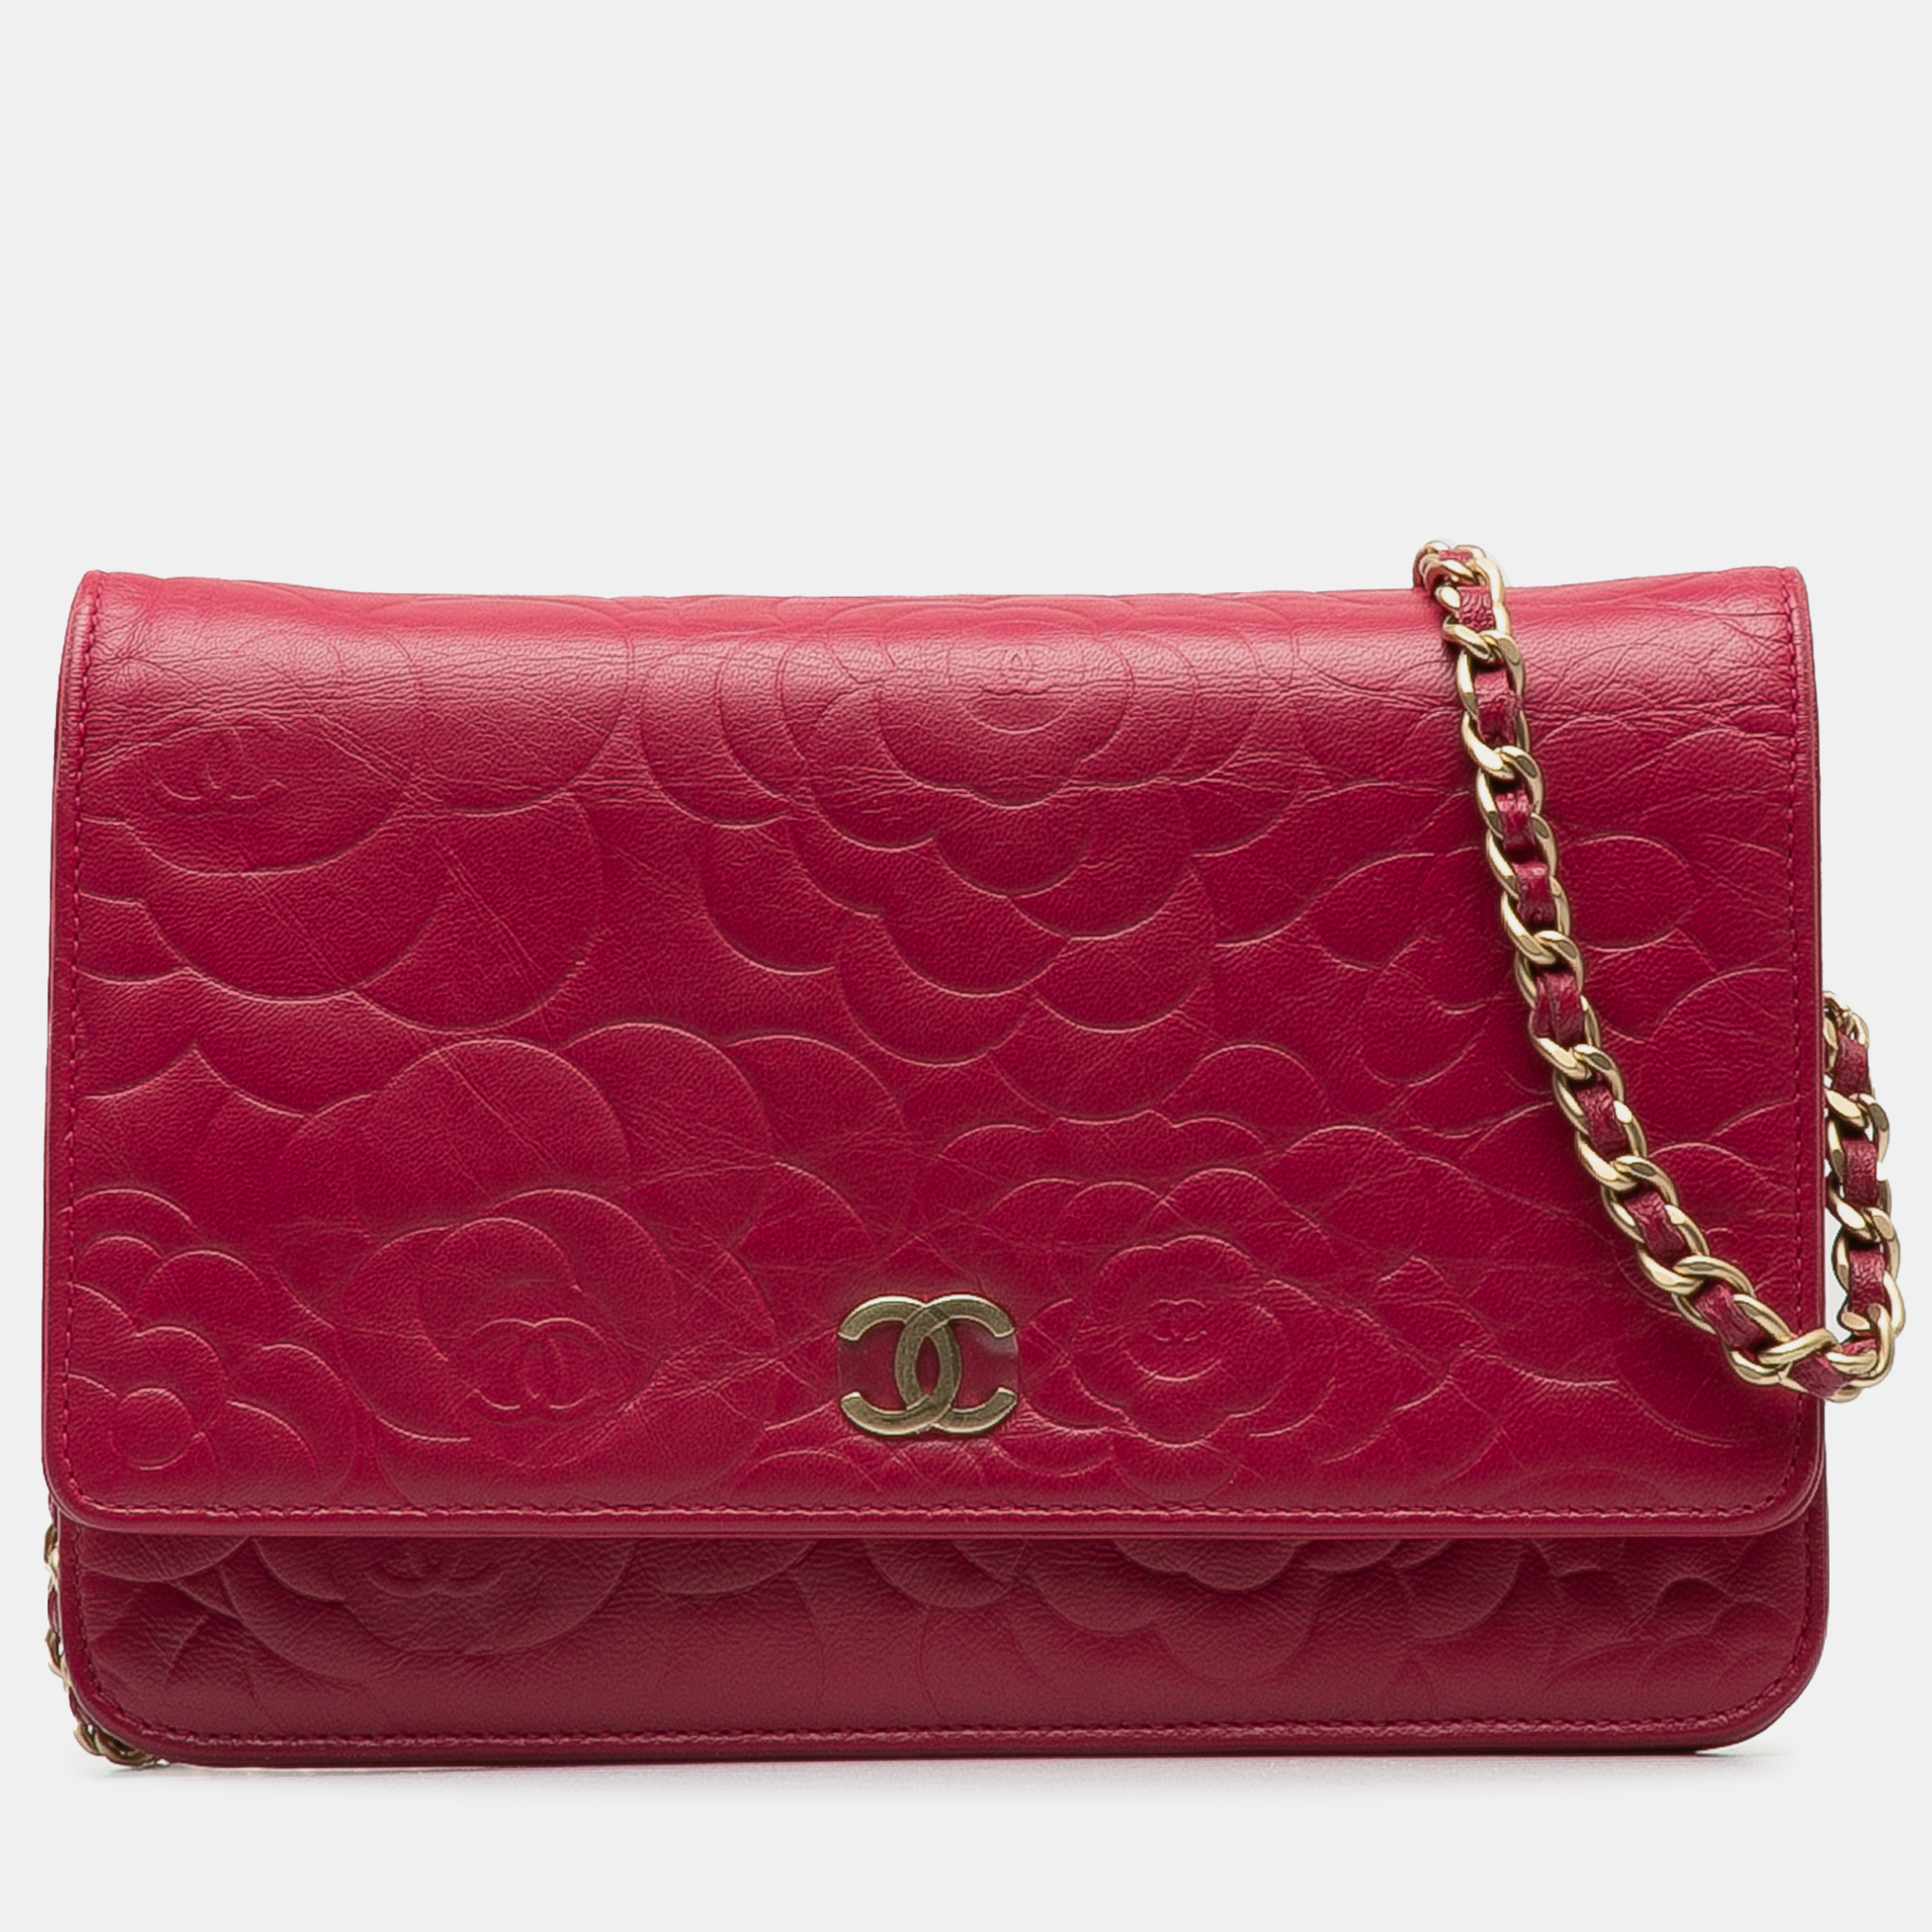 Chanel camellia wallet on chain